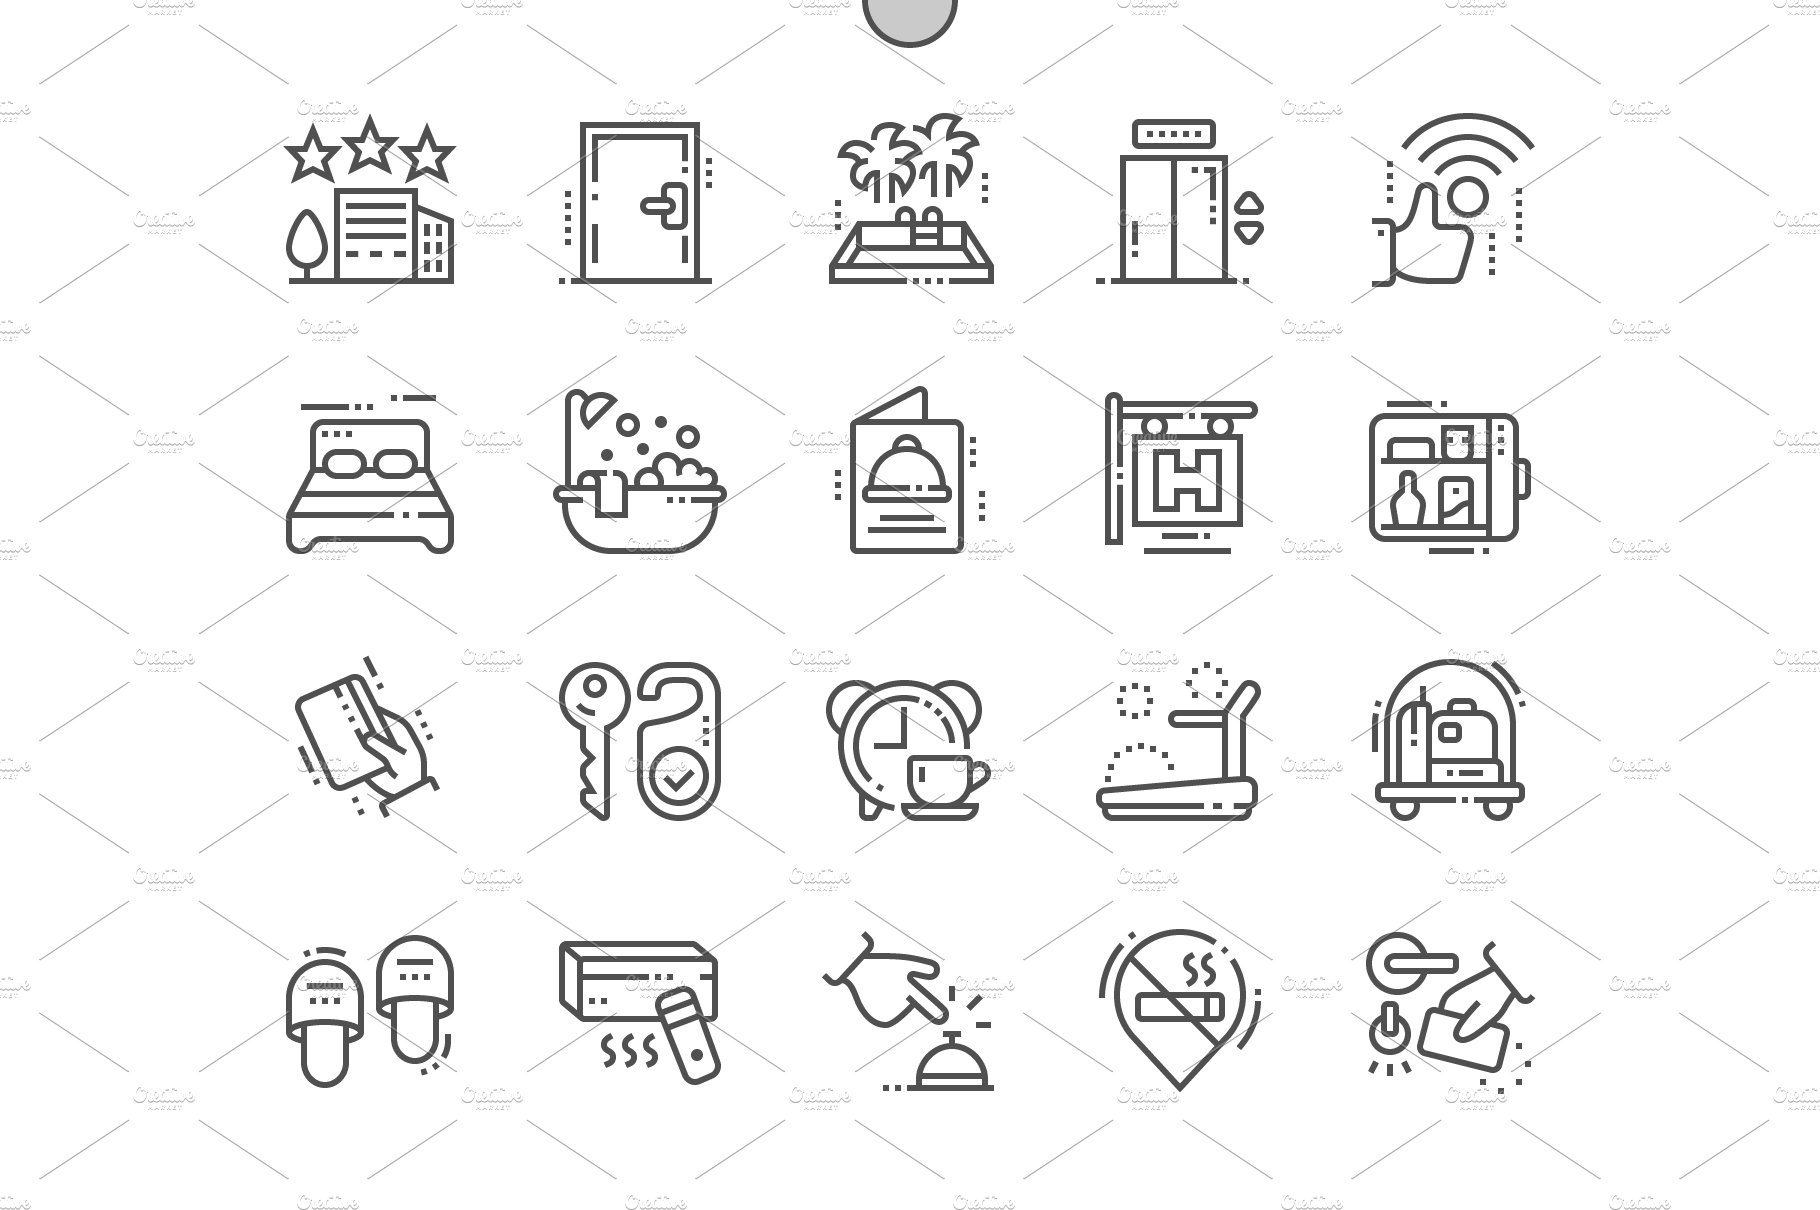 Hotels Line Icons cover image.